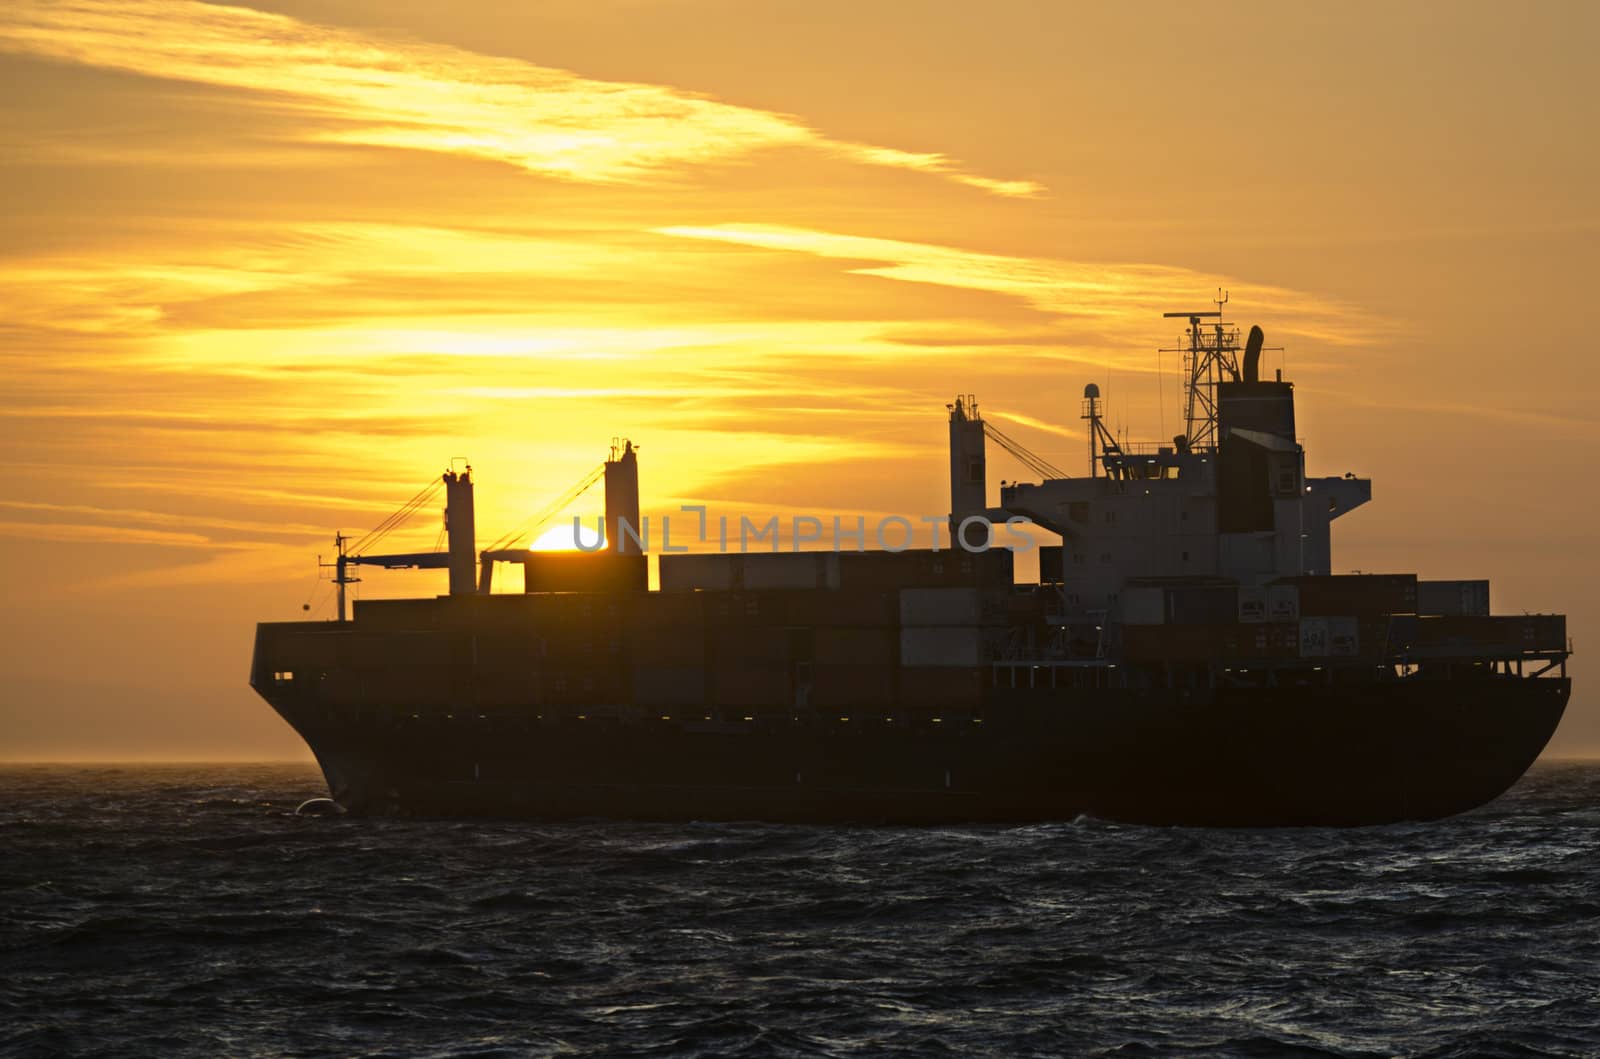 A container ship heading towards sunset on the german North Sea.